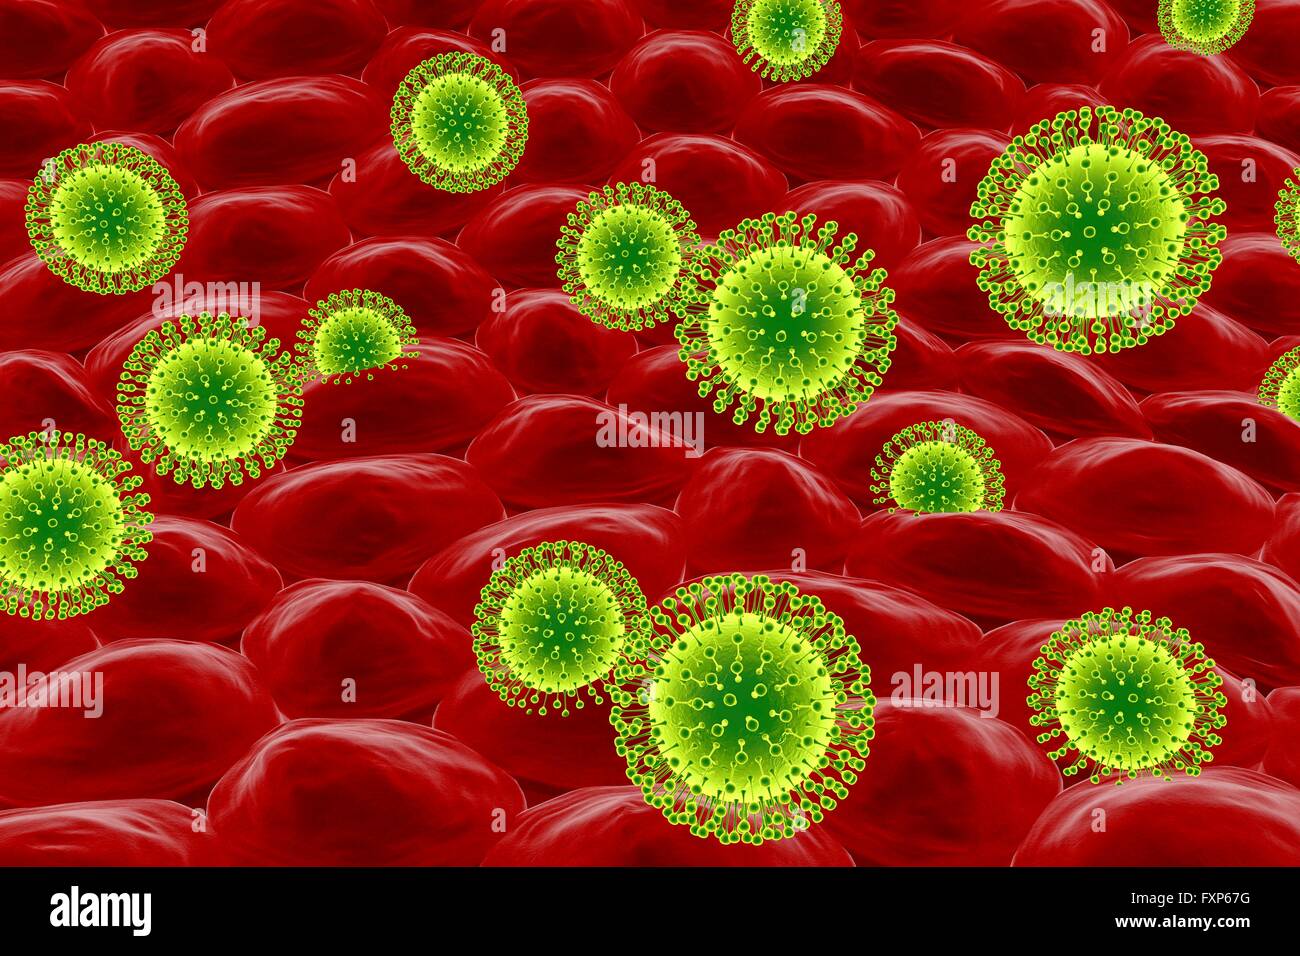 Zika viruses infecting skin cells, computer illustration. This is an RNA (ribonucleic acid) virus from the Flaviviridae family. It is transmitted to humans via the bite of an infected Aedes sp. mosquito. It causes zika fever, a mild disease with symptoms including rash, joint pain and conjunctivitis. In 2015 a previously unknown connection between Ziska infection in pregnant women and microcephaly (small head) in newborns was reported. This can cause miscarriage or death soon after birth, or lead to developmental delays and disorders. Recent laboratory studies have shown skin cells to be Stock Photo